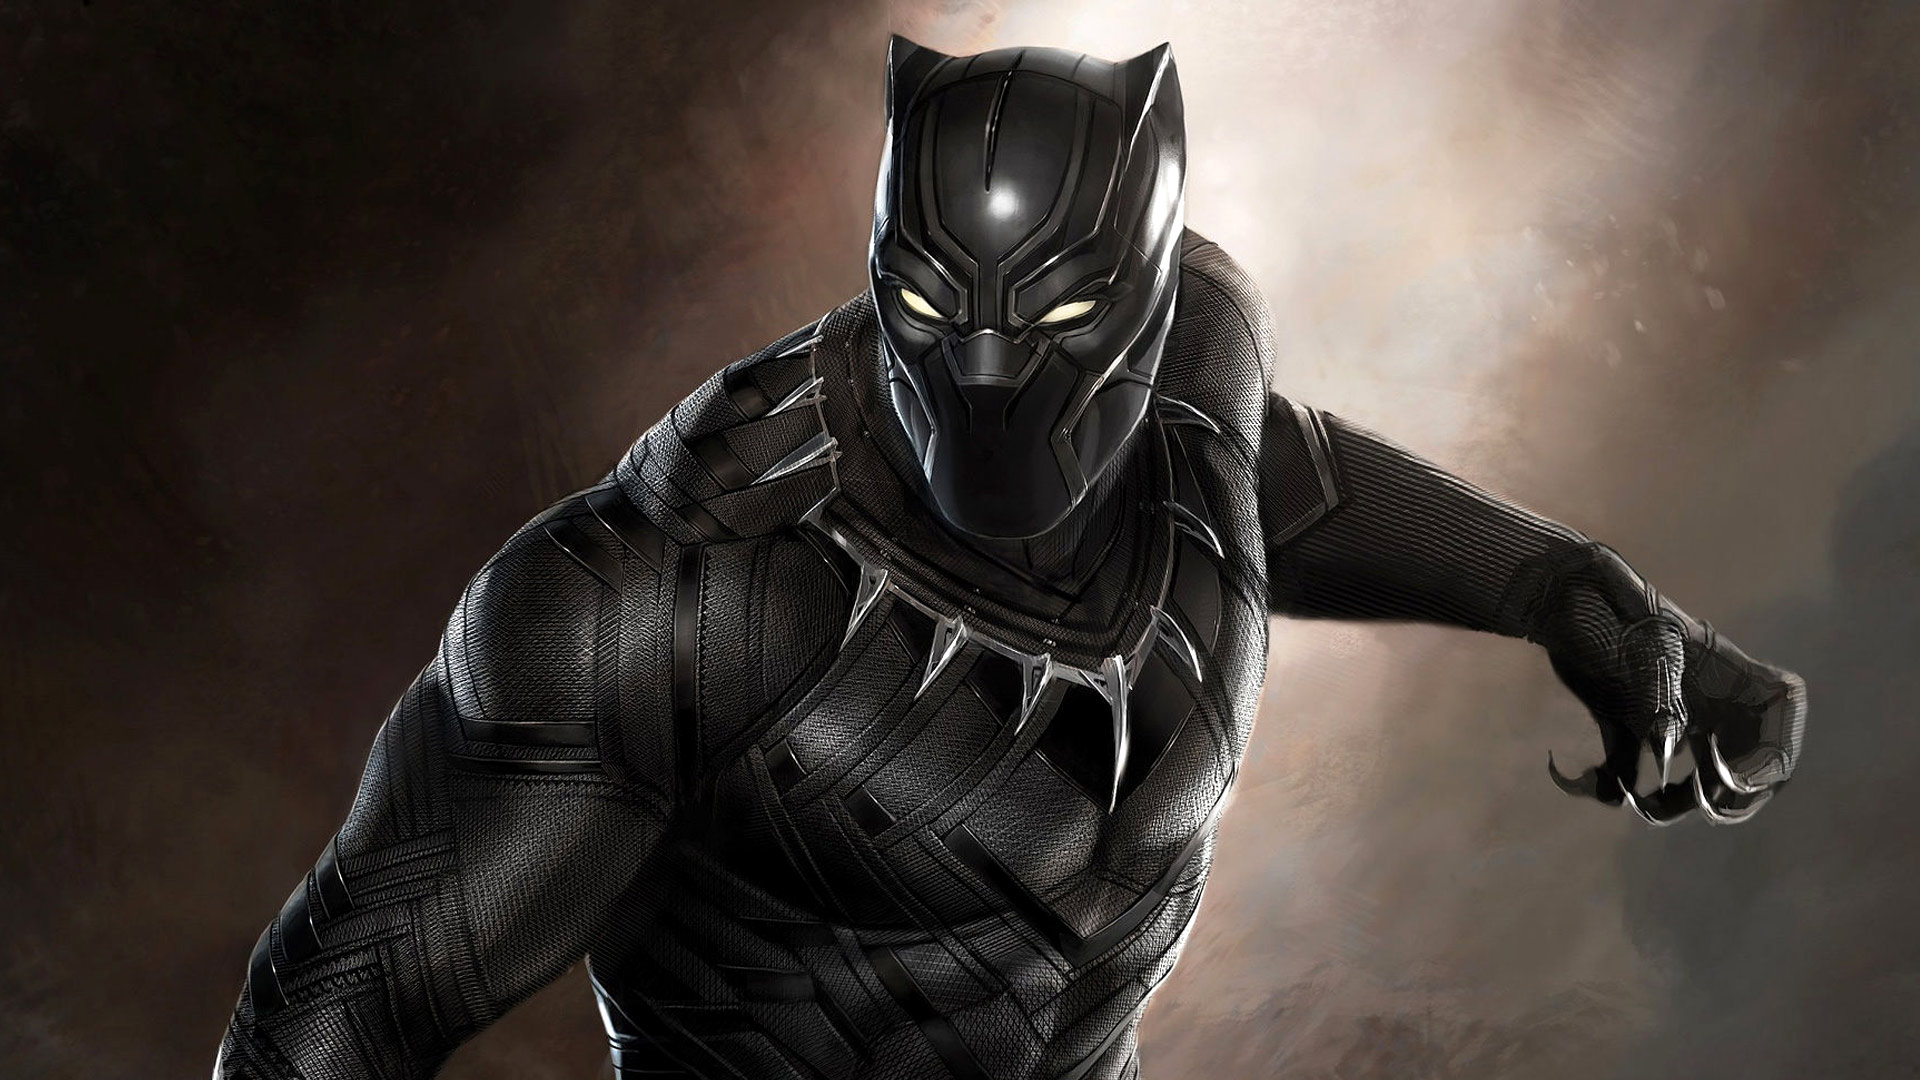 Download Black Panther Wallpaper For iPhone iPad